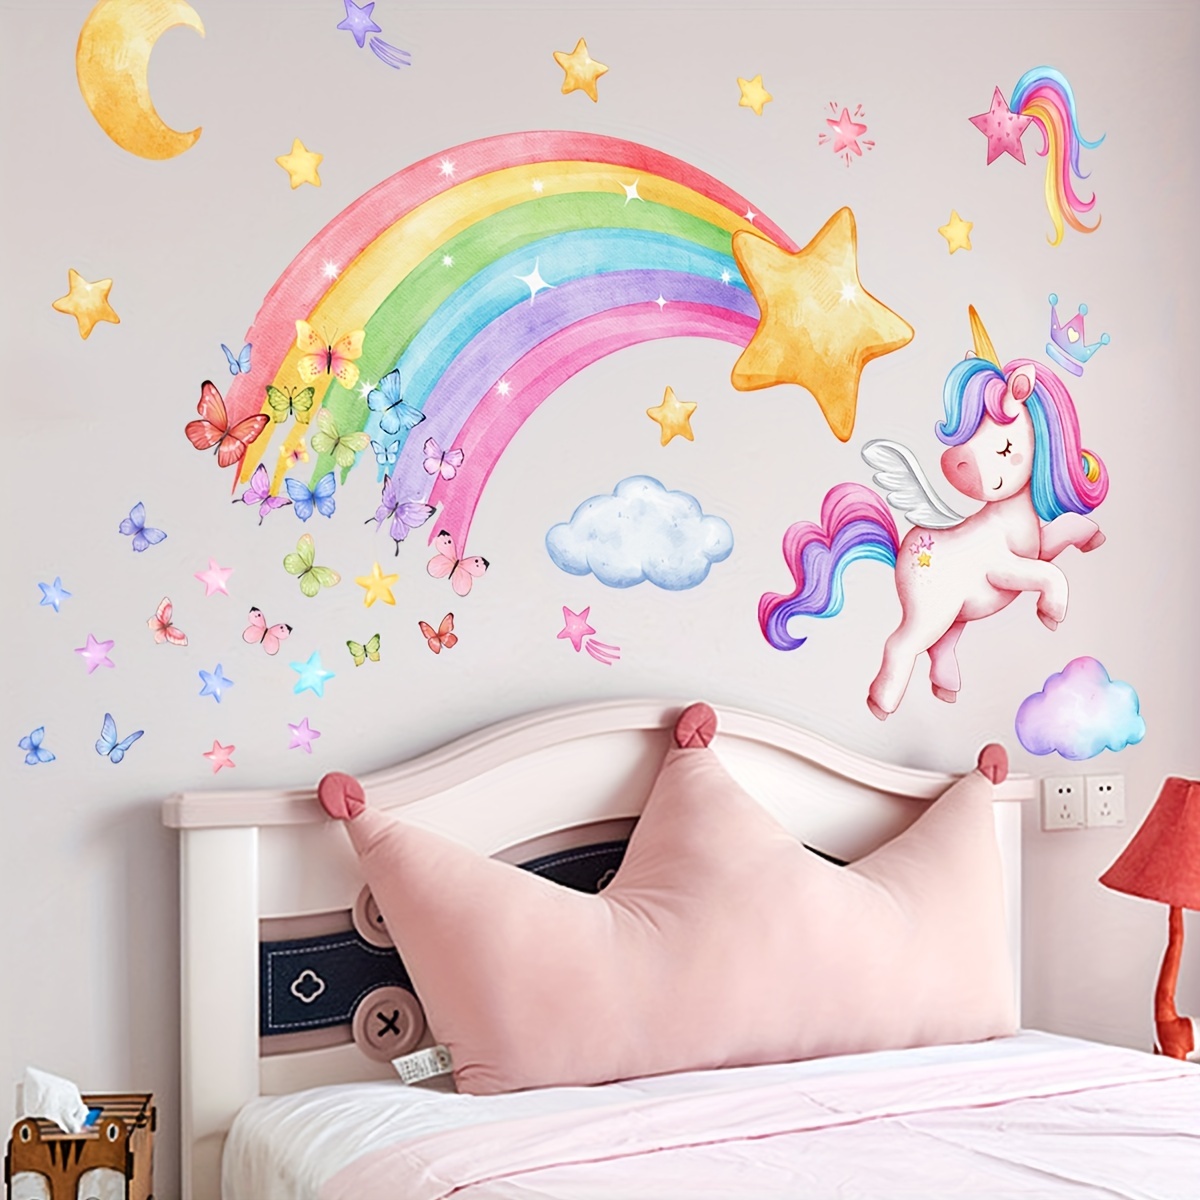 

1pc New Creative Rainbow Unicorn Butterfly Sticker, Background Decorative Wall Stickers, Bedroom Self-adhesive Wall Stickers, Aesthetic Home Decoration, Room Decor, Funny Items